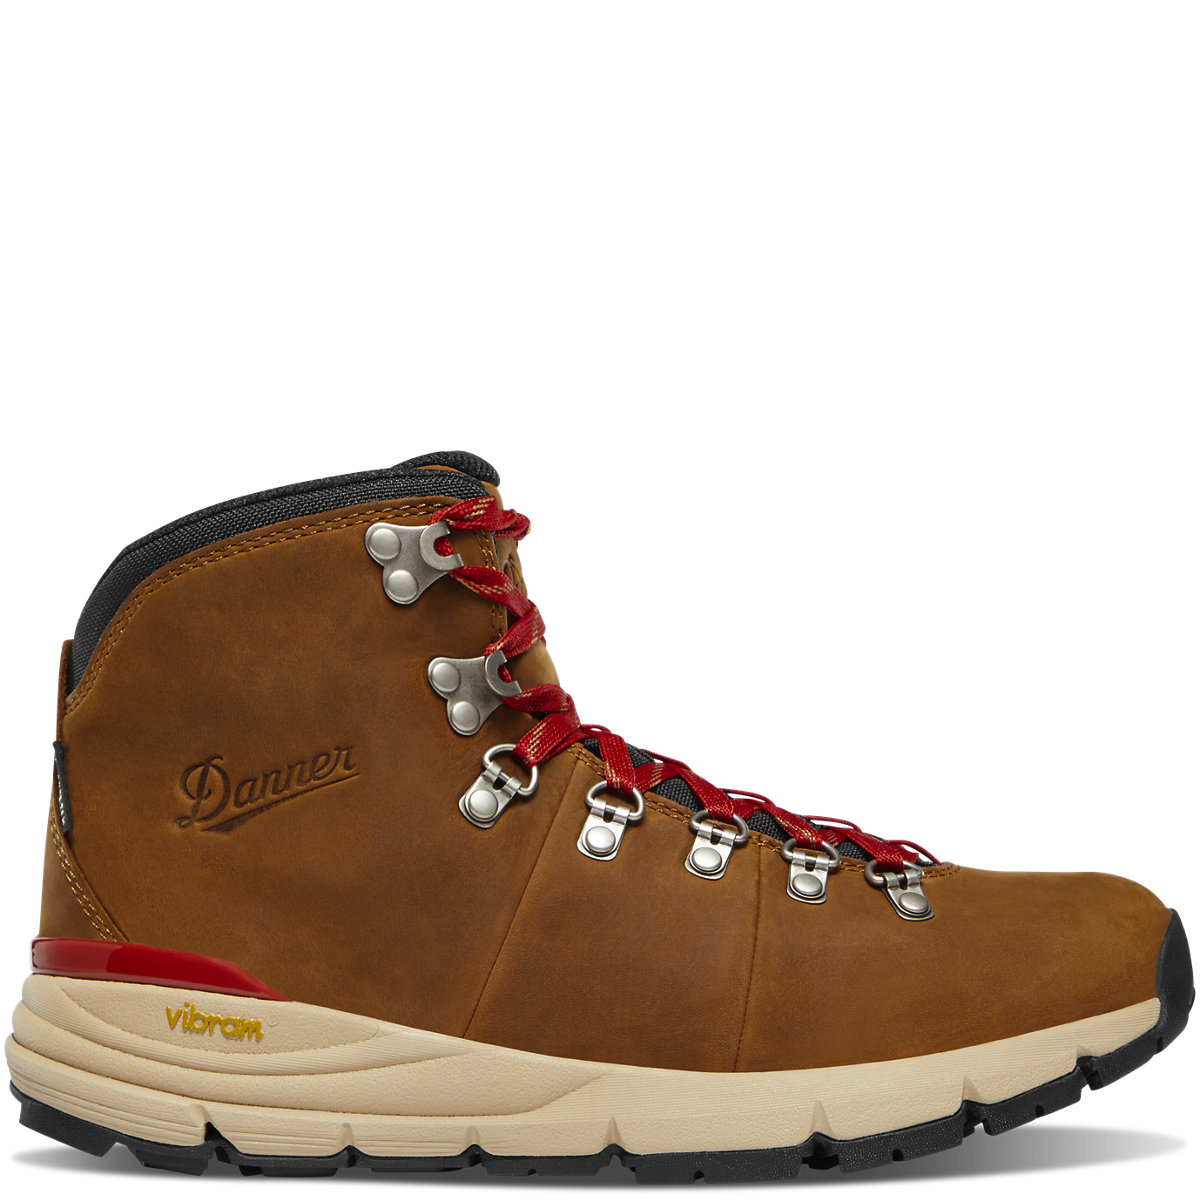 Danner - Mountain 600 Leaf GTX Grizzly Brown/Rhodo Red